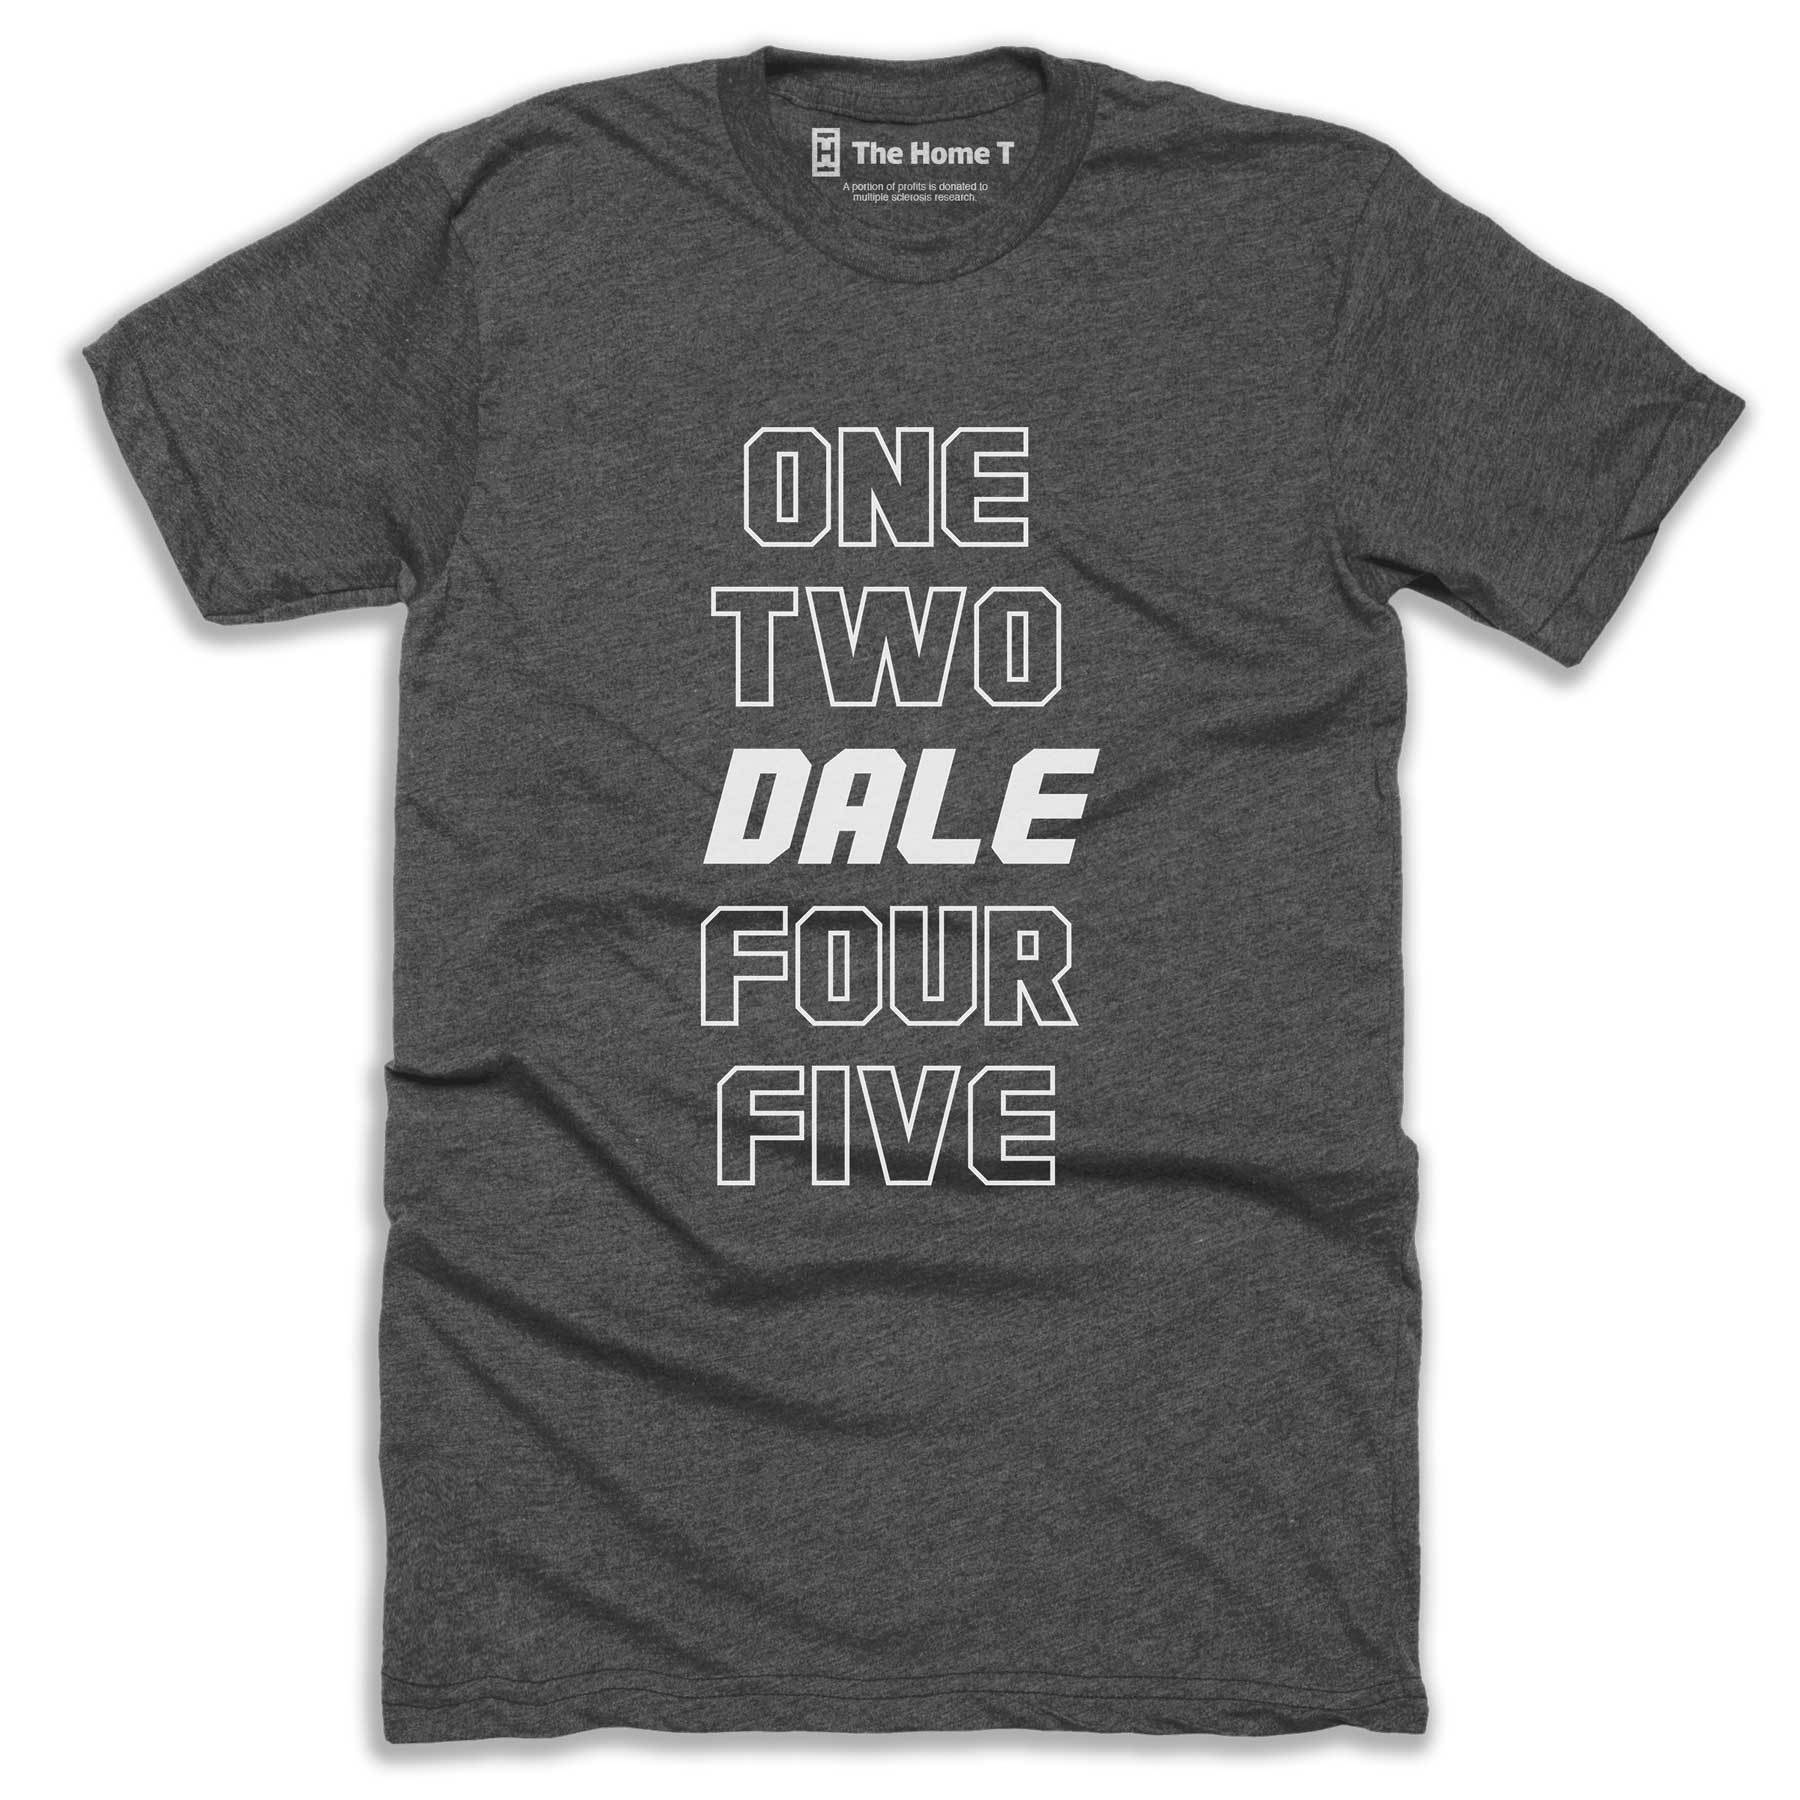 Count on Dale